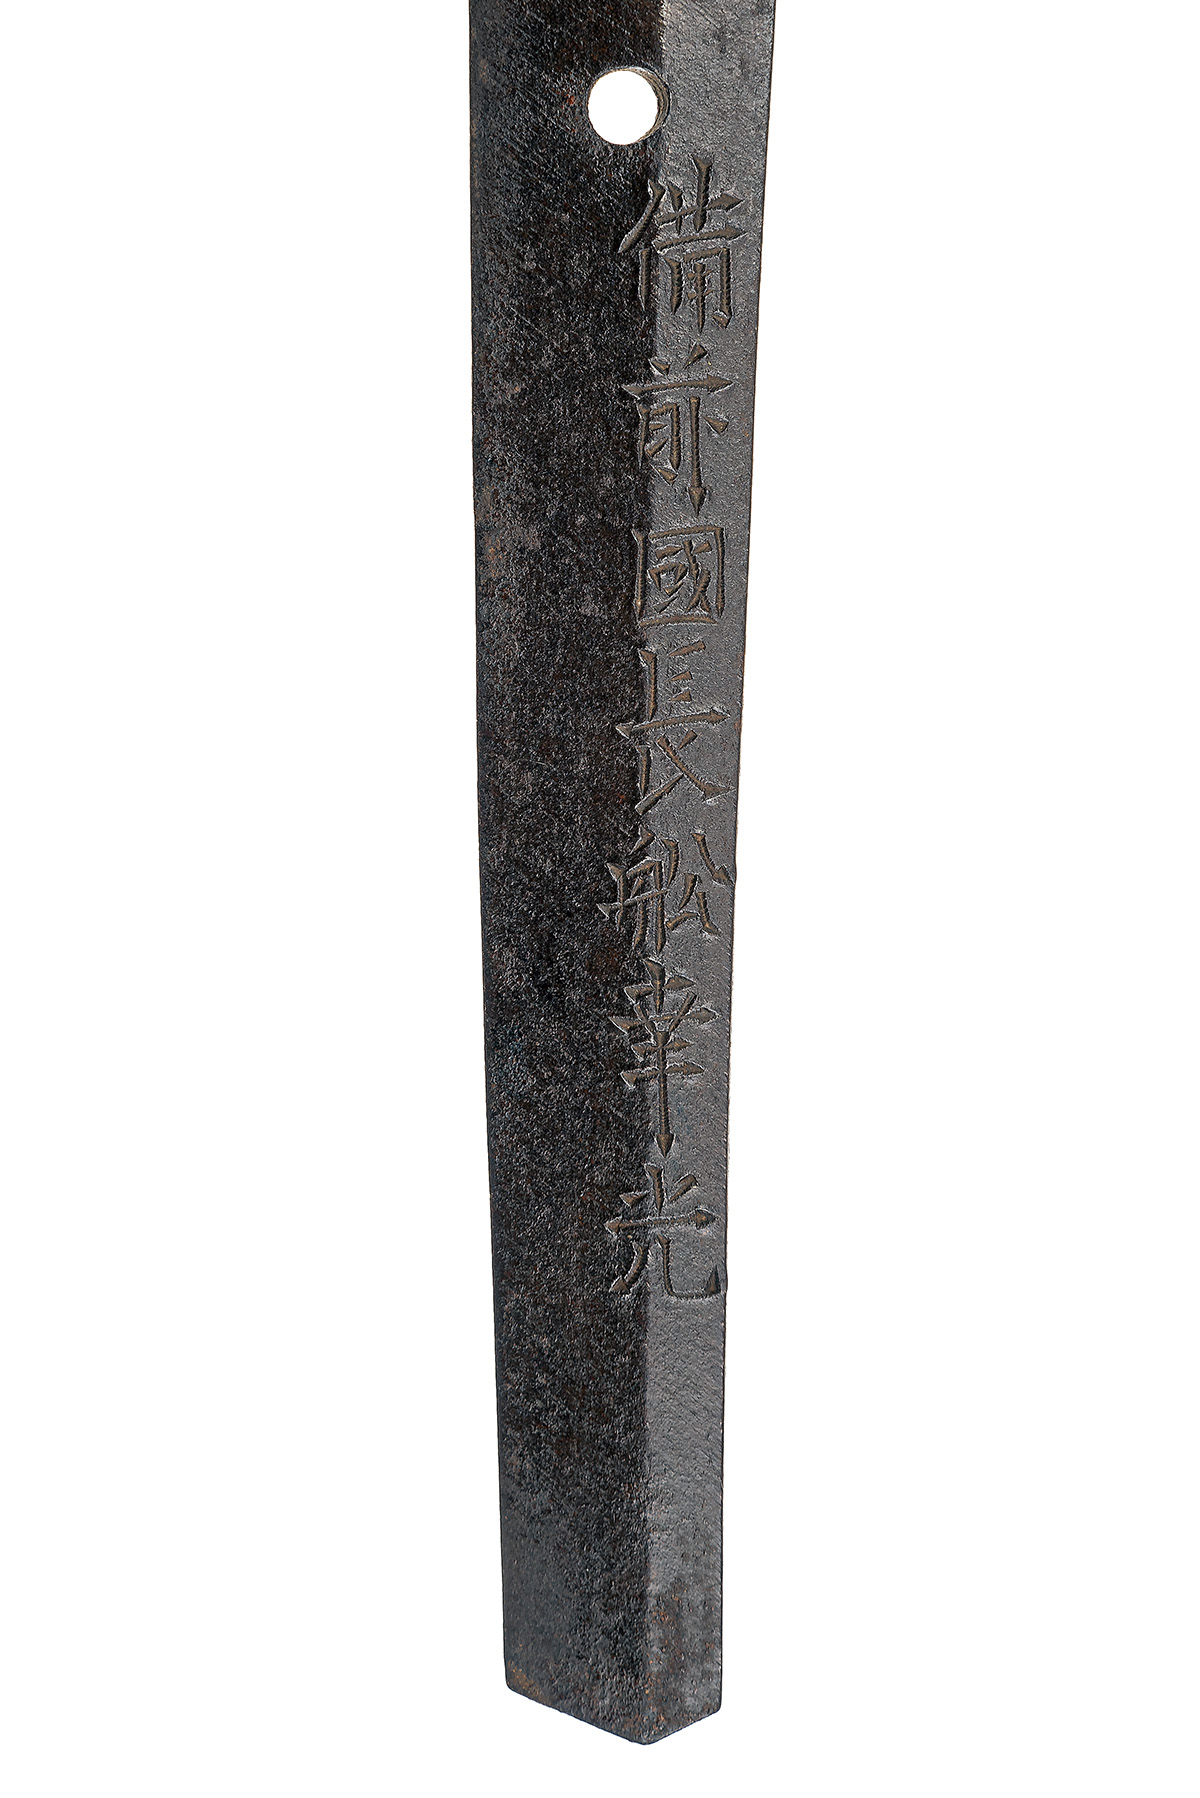 A JAPANESE KATANA WITH SIGNED BLADE, mid 19th century, with curved 28in. blade (some thin staining), - Image 6 of 7